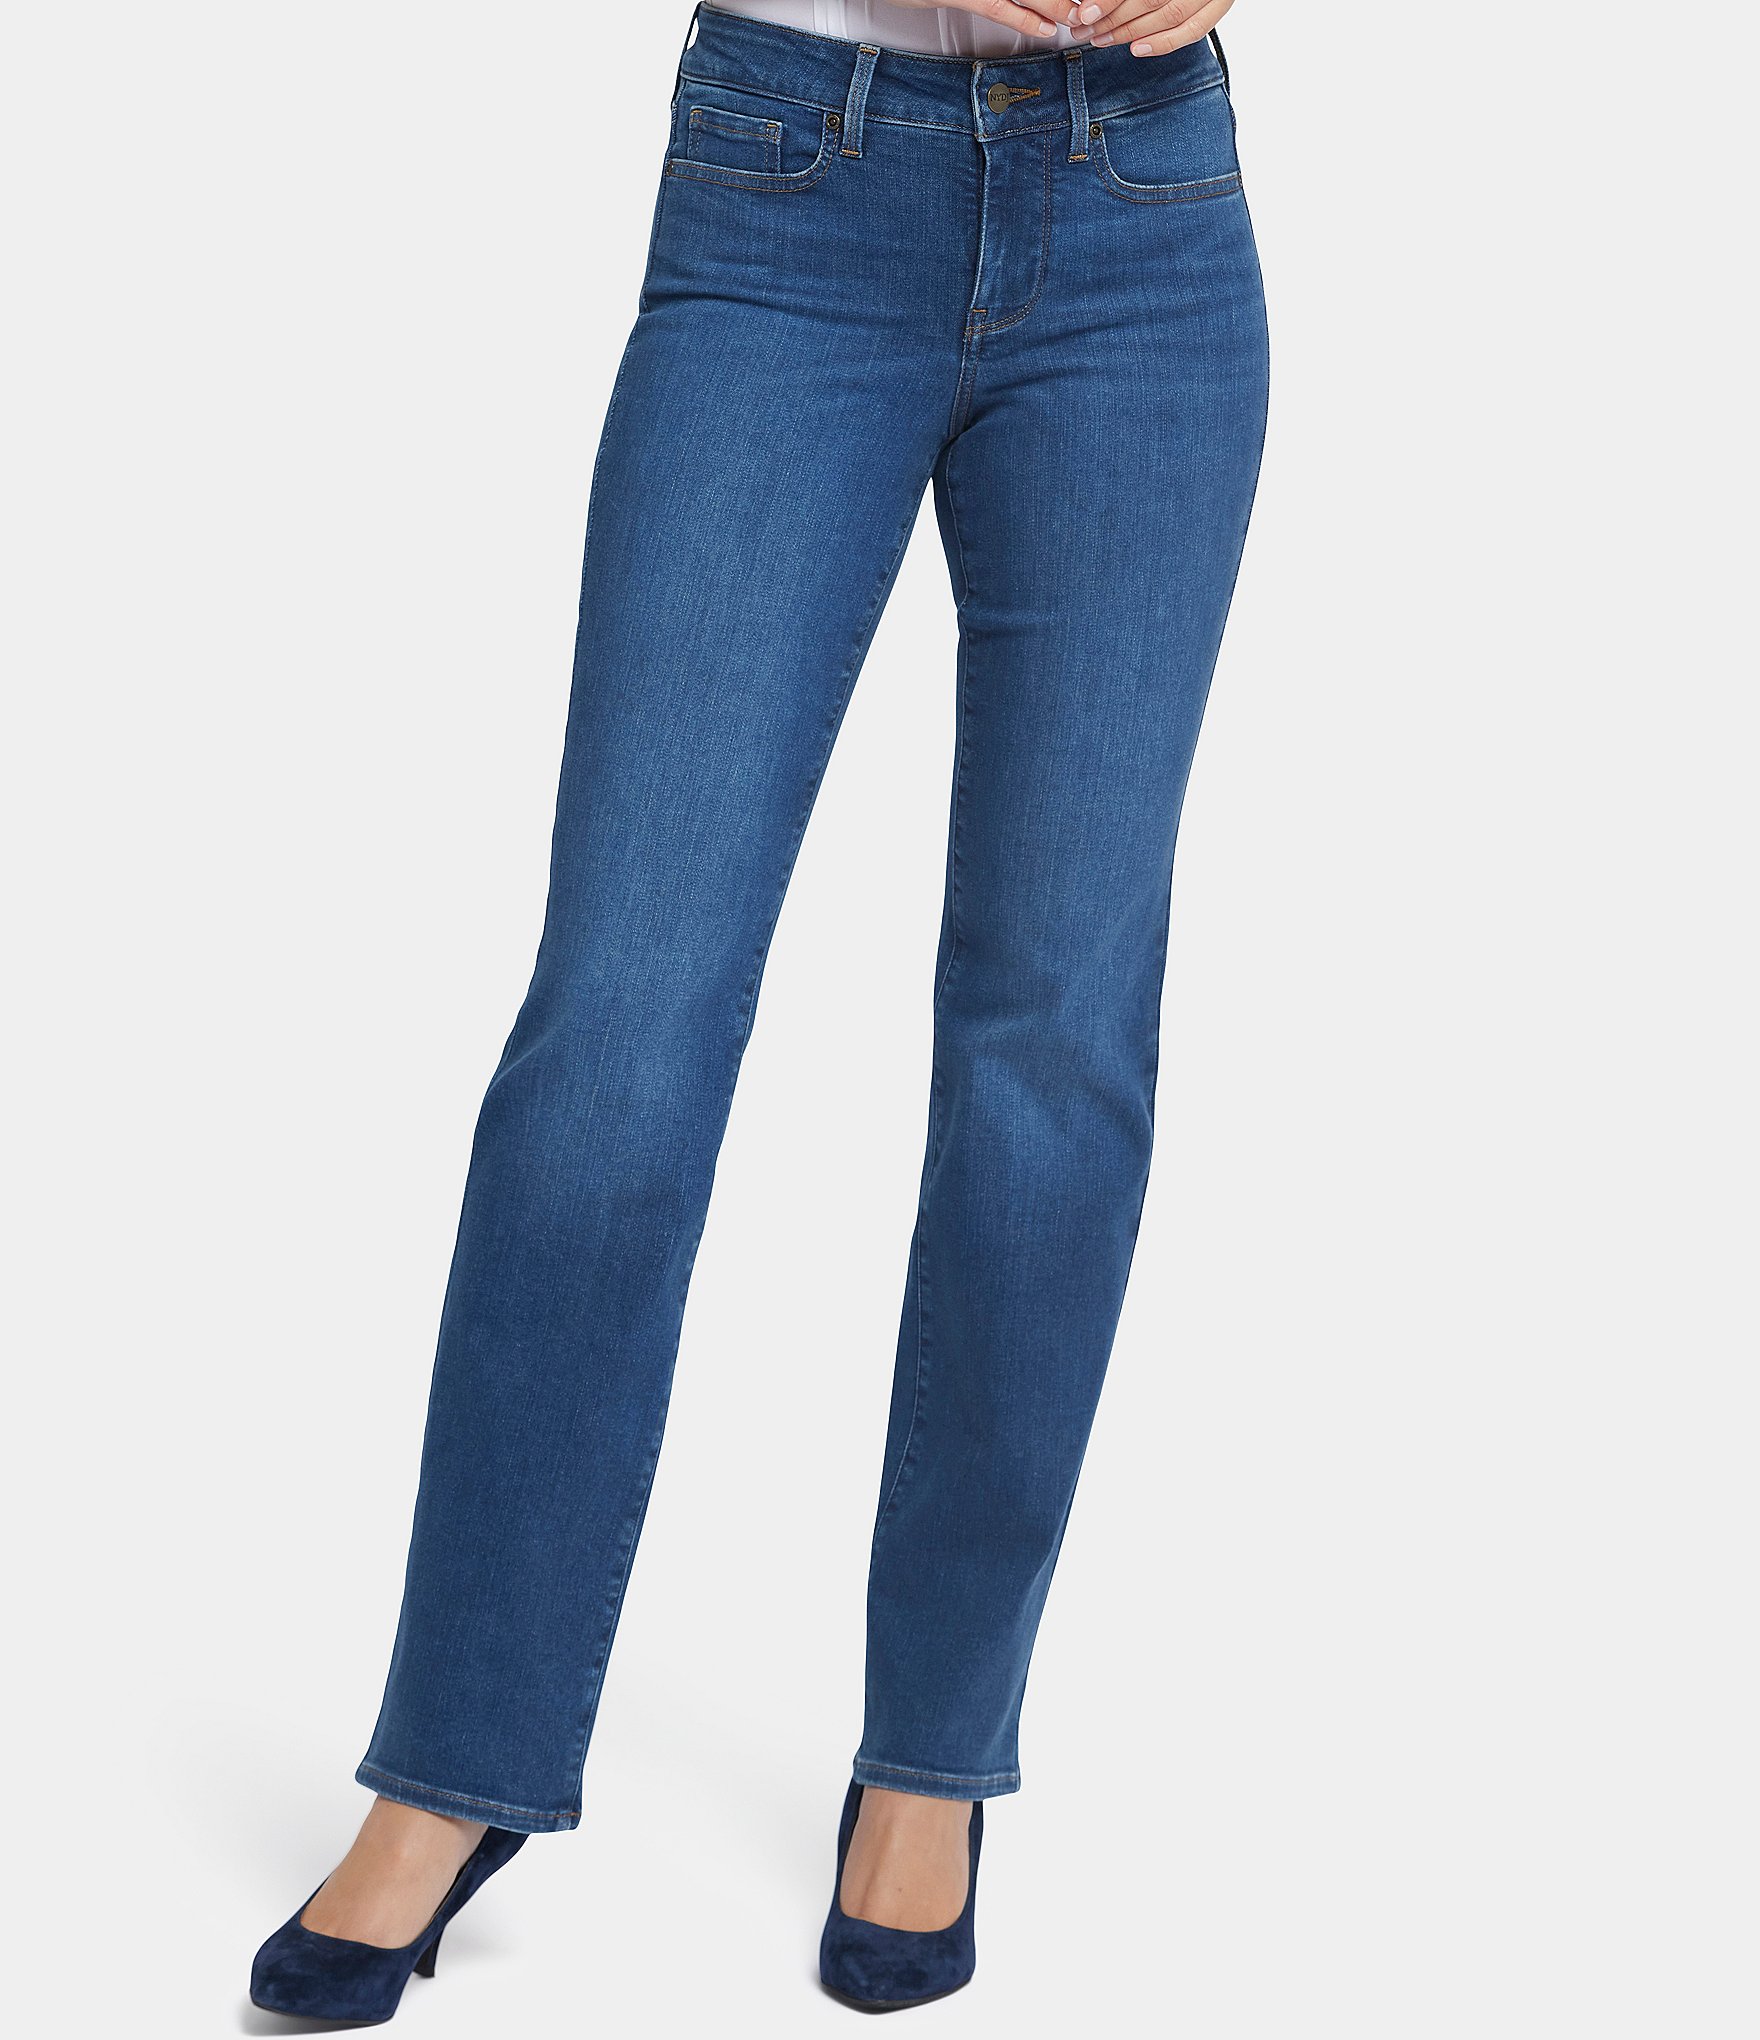 Westbound Petite Size the PARK AVE fit Denim Mid Rise Straight Leg Jeans